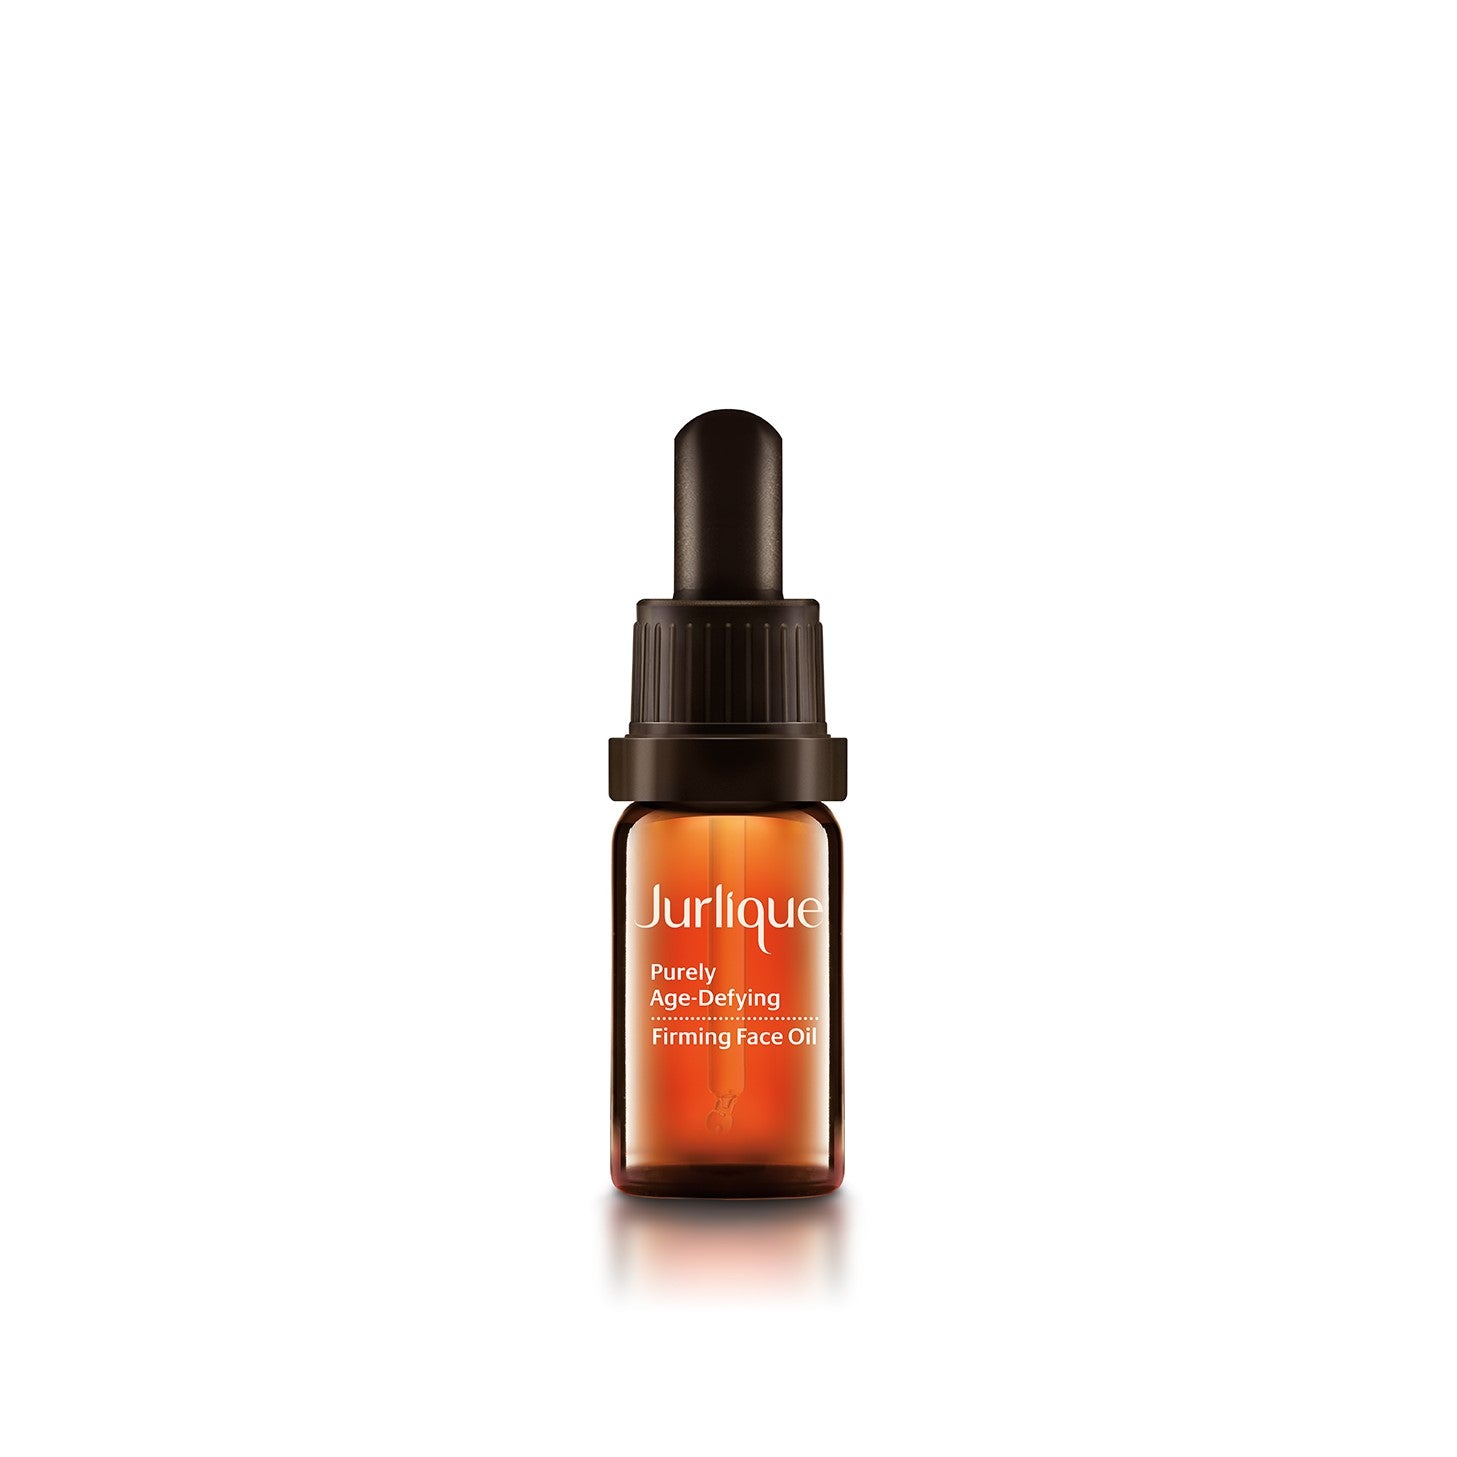 Purely Age-Defying Firming Face Oil 10mL